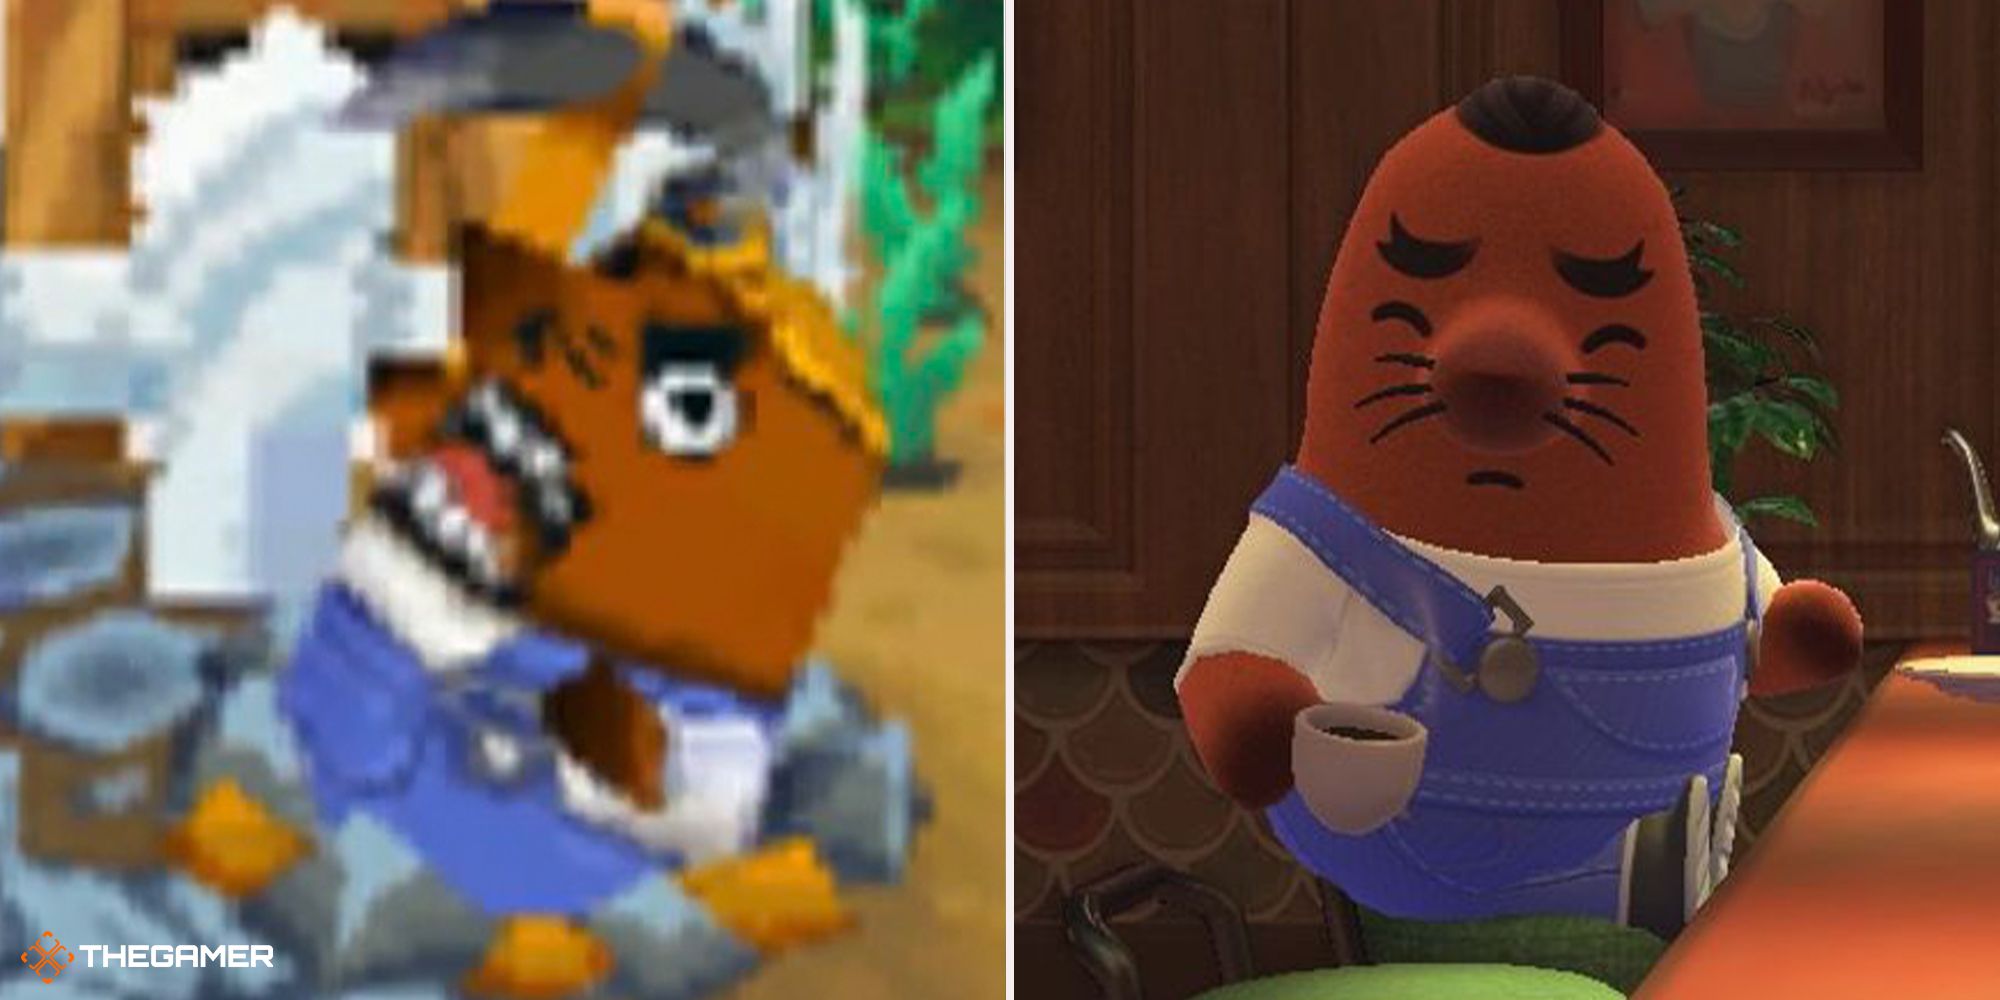 Animal Crossing - Resetti in the old games on left, Resetti in New Horizons on right 2